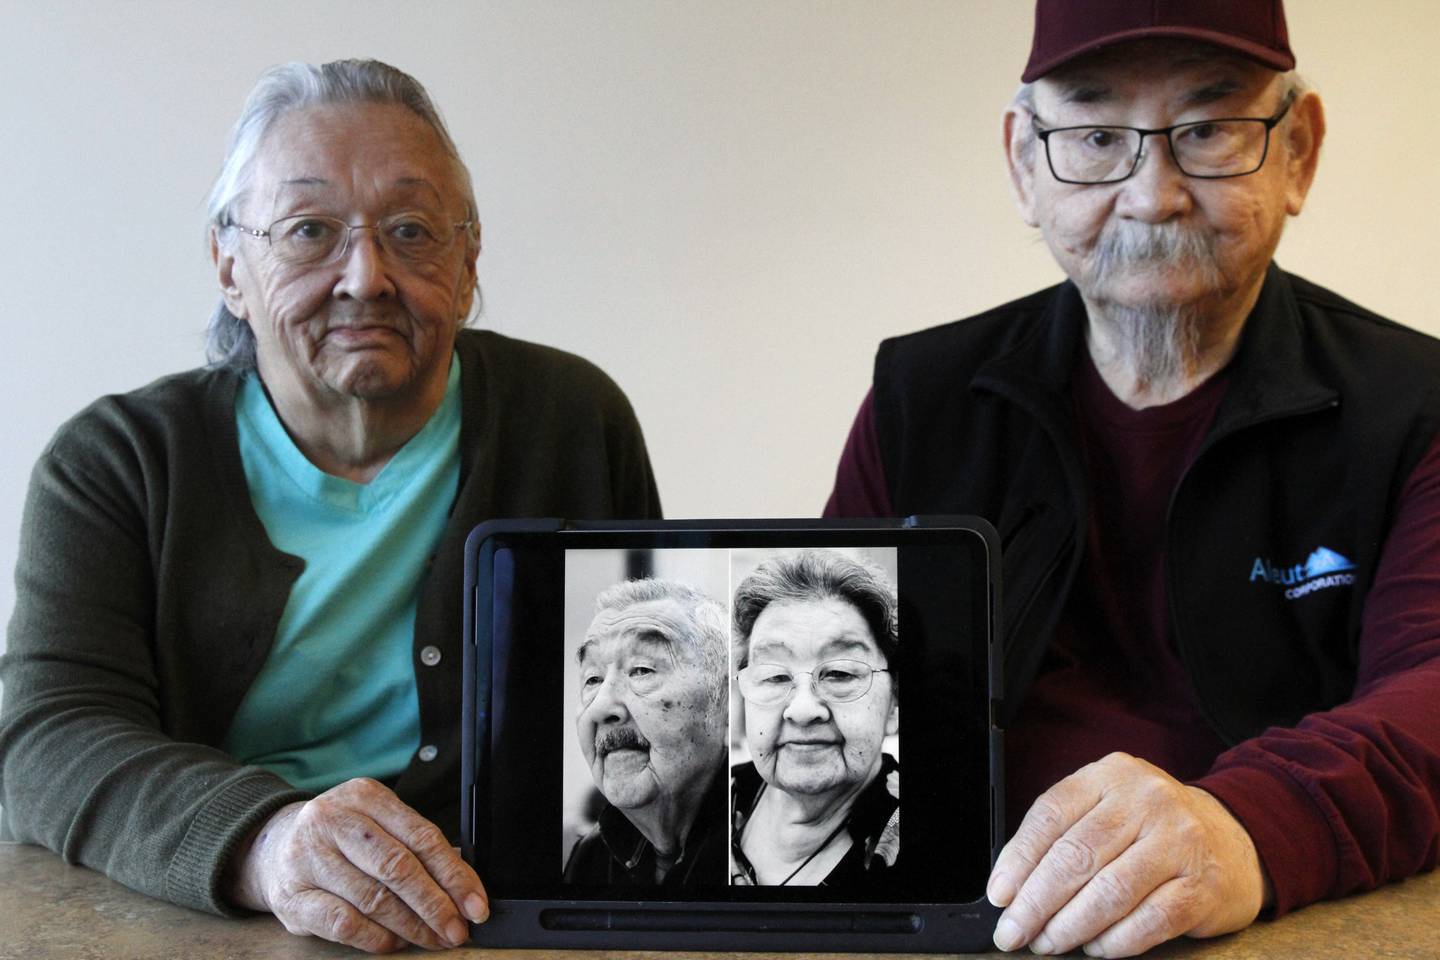 Pauline Golodoff, left, and George Kudrin hold an iPad featuring images of their deceased spouses, Gregory Golodoff and Elizabeth Golodoff Kurdrin, Friday, Dec. 1, 2023, in Anchorage, Alaska.